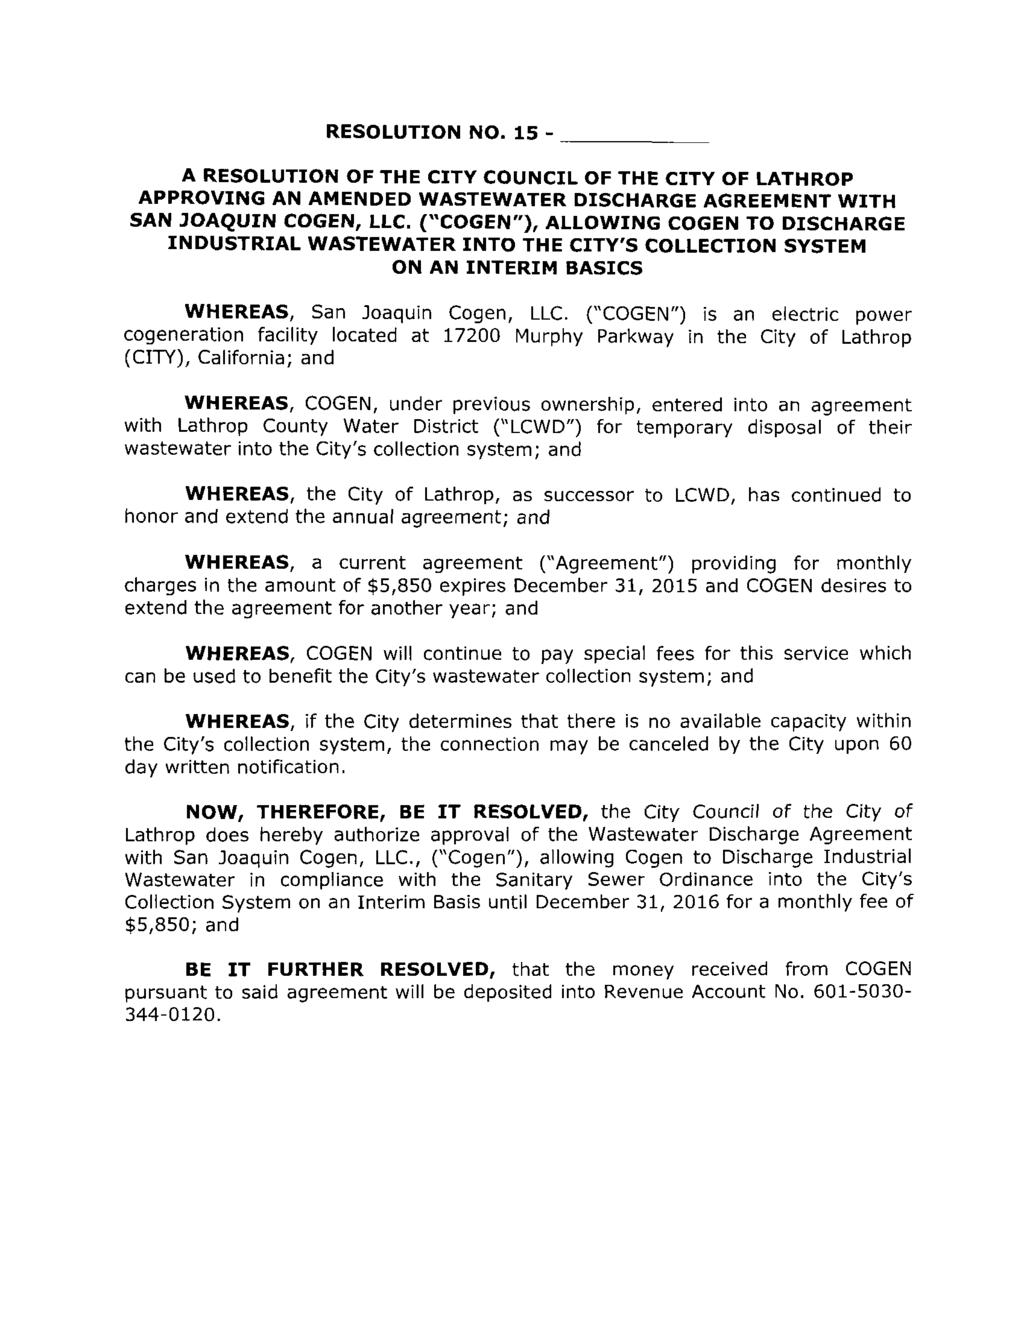 RESOLUTION NO 15 A RESOLUTION OF THE CITY COUNCIL OF THE CITY OF LATHROP APPROVING AN AMENDED WASTEWATER DISCHARGE AGREEMENT WITH SAN OAQUIN COGEN LLC COGEN ALLOWING COGEN TO DISCHARGE INDUSTRIAL